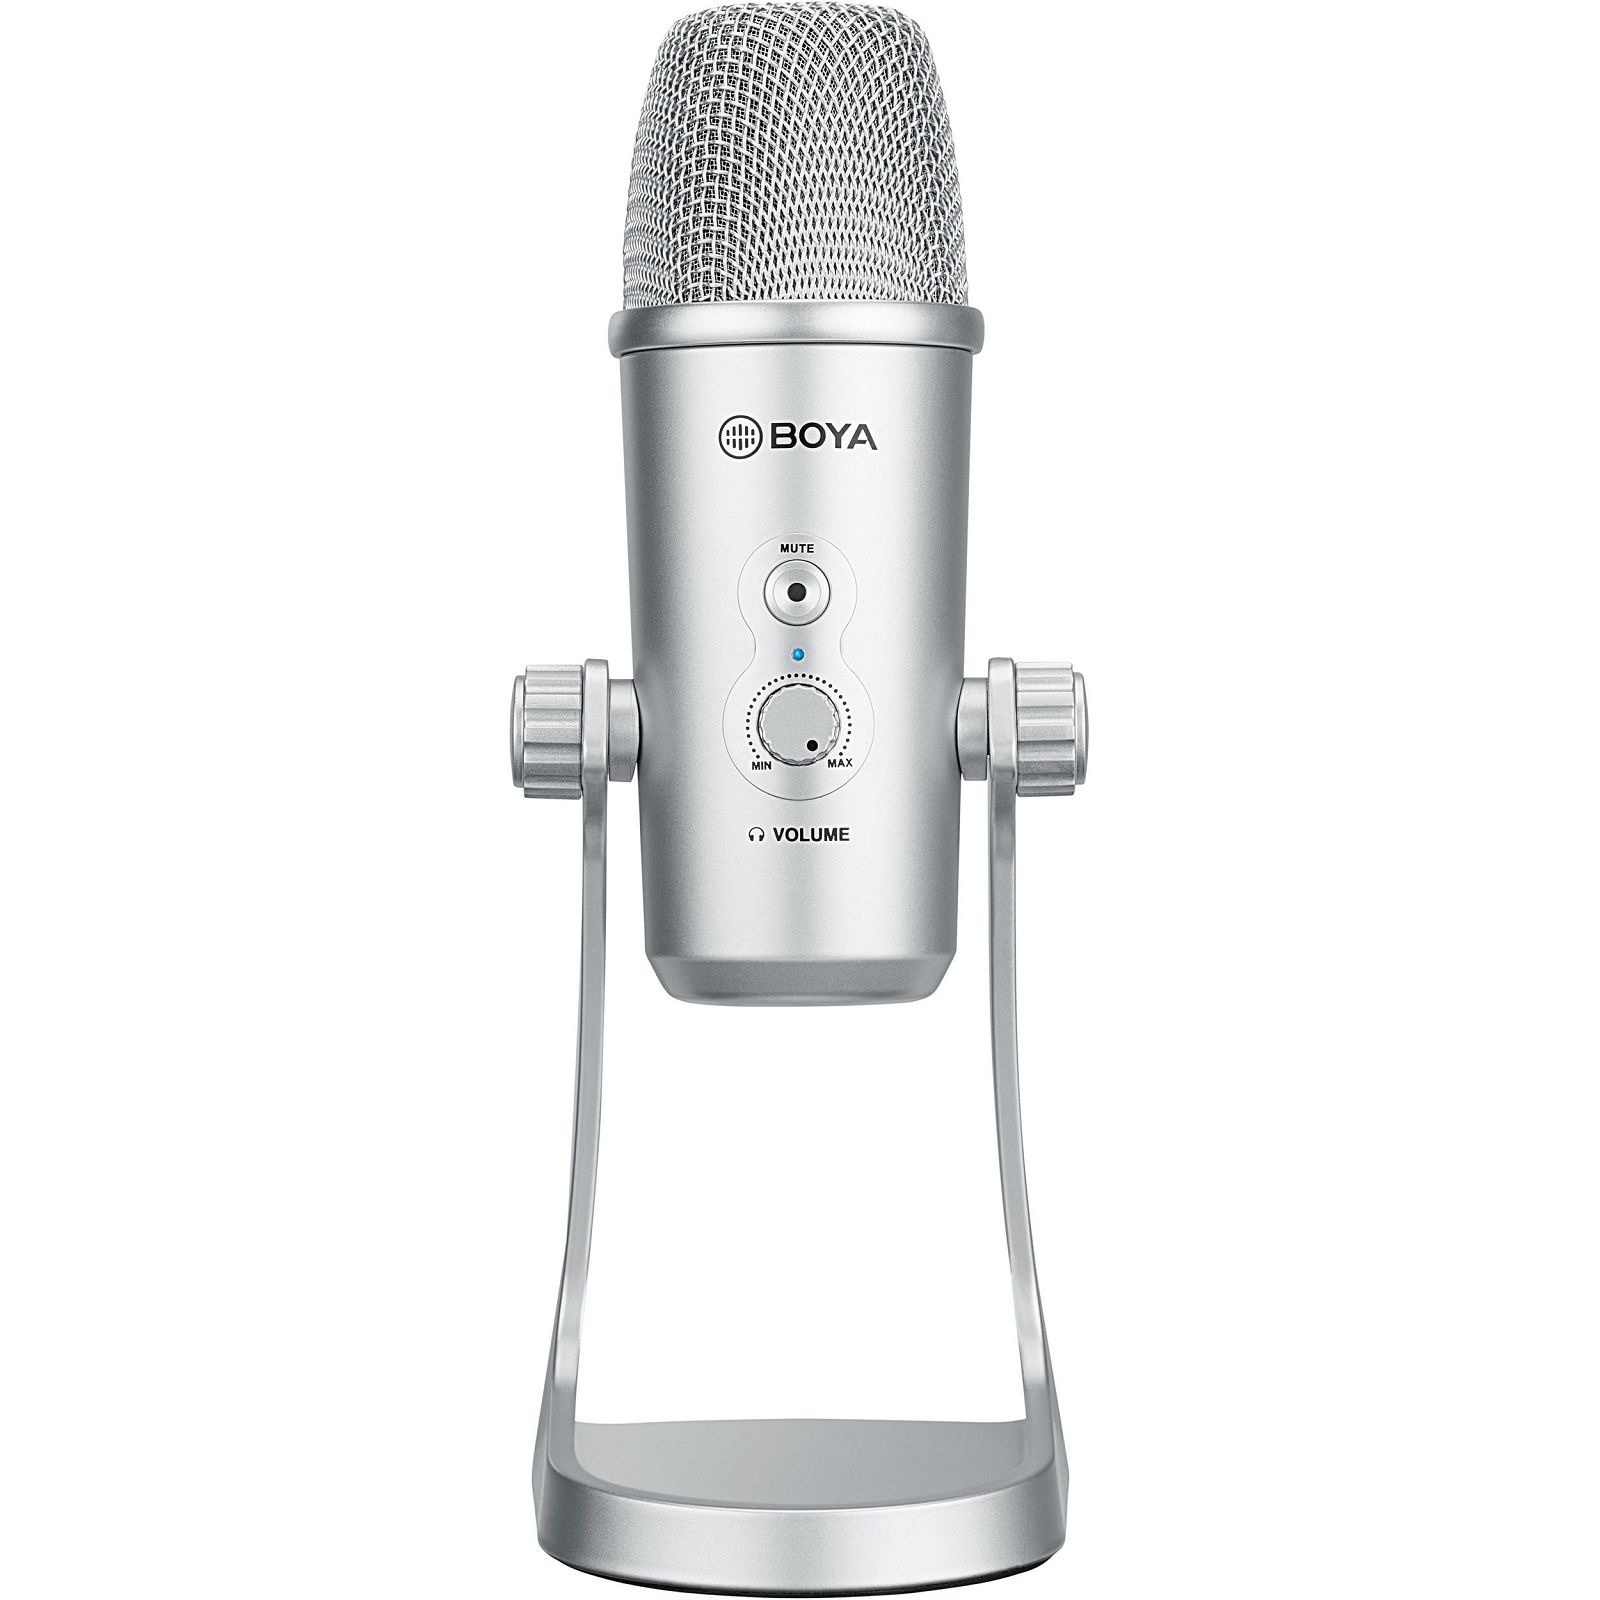 Boya BY-PM700SP USB Mikrofon Large-Diaphragm Condenser Microphone for smartphones